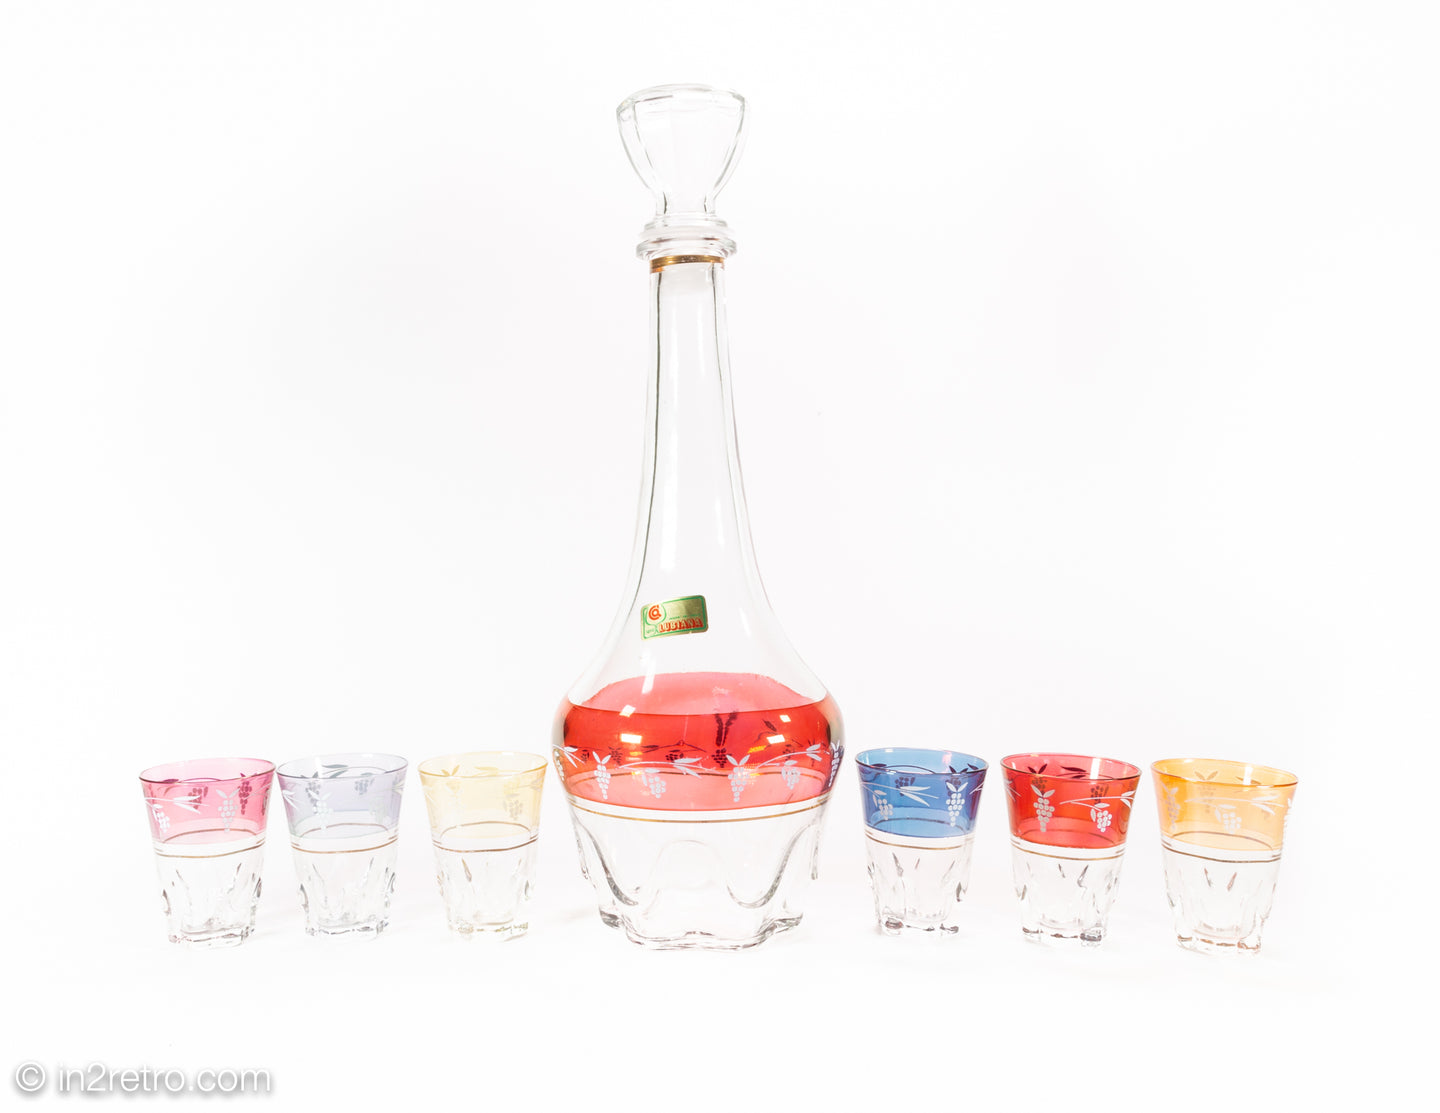 SPA LUBIANA 8 PIECE SET - DECANTER WITH STOPPER AND SIX SHOT GLASSES | MADE IN ITALY| NEW IN BOX W/ LABEL